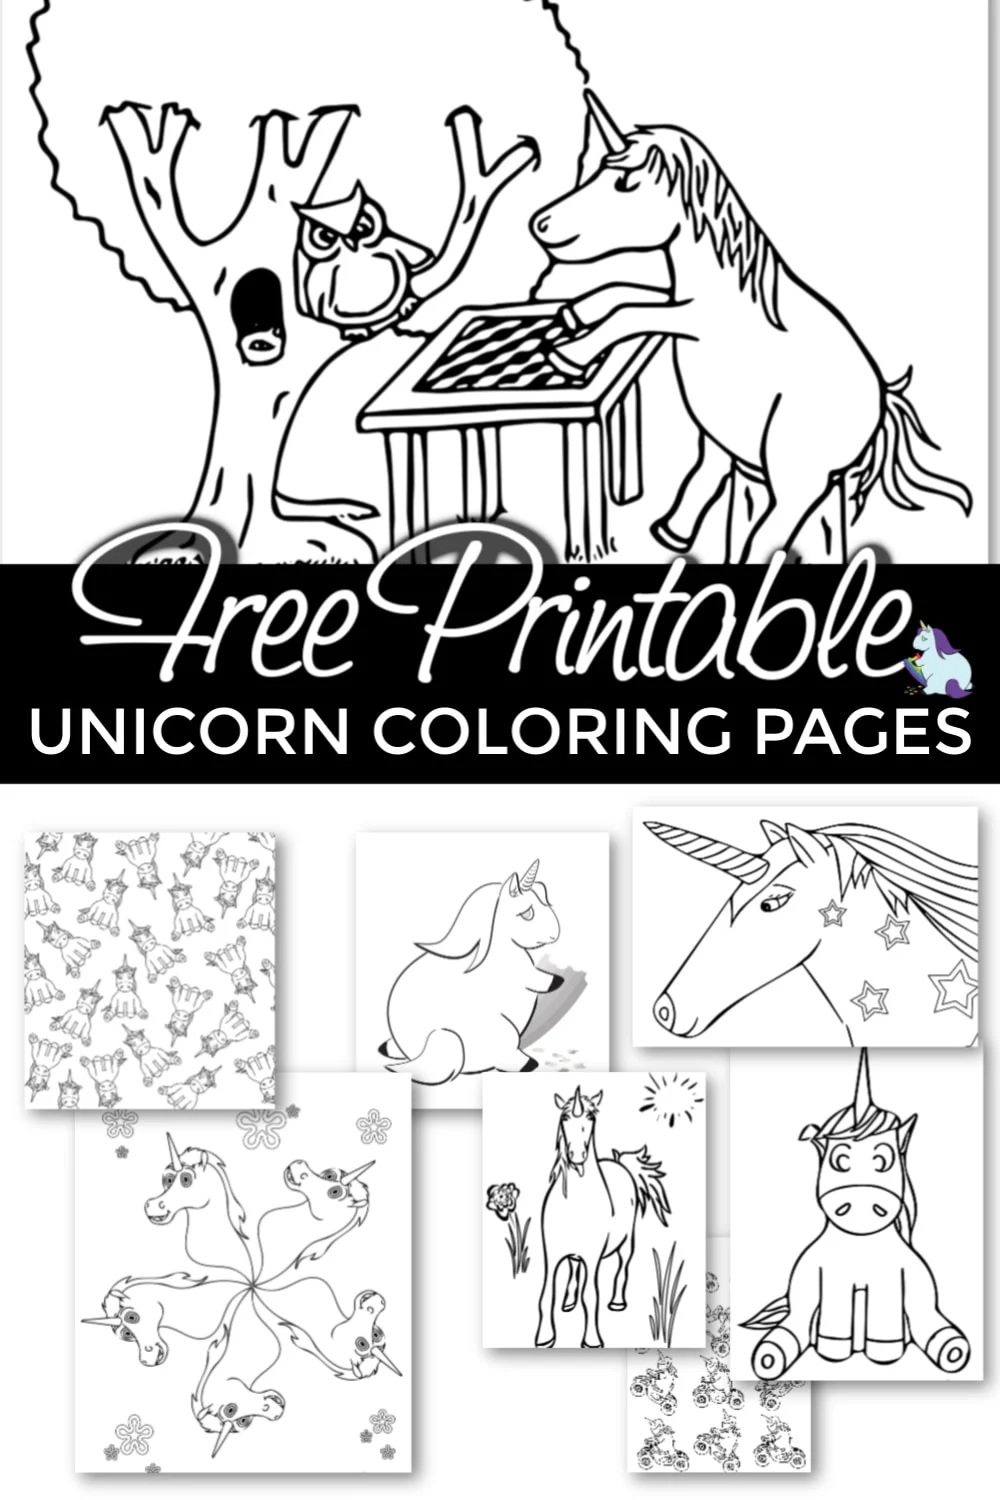 Free printable unicorn coloring pages.